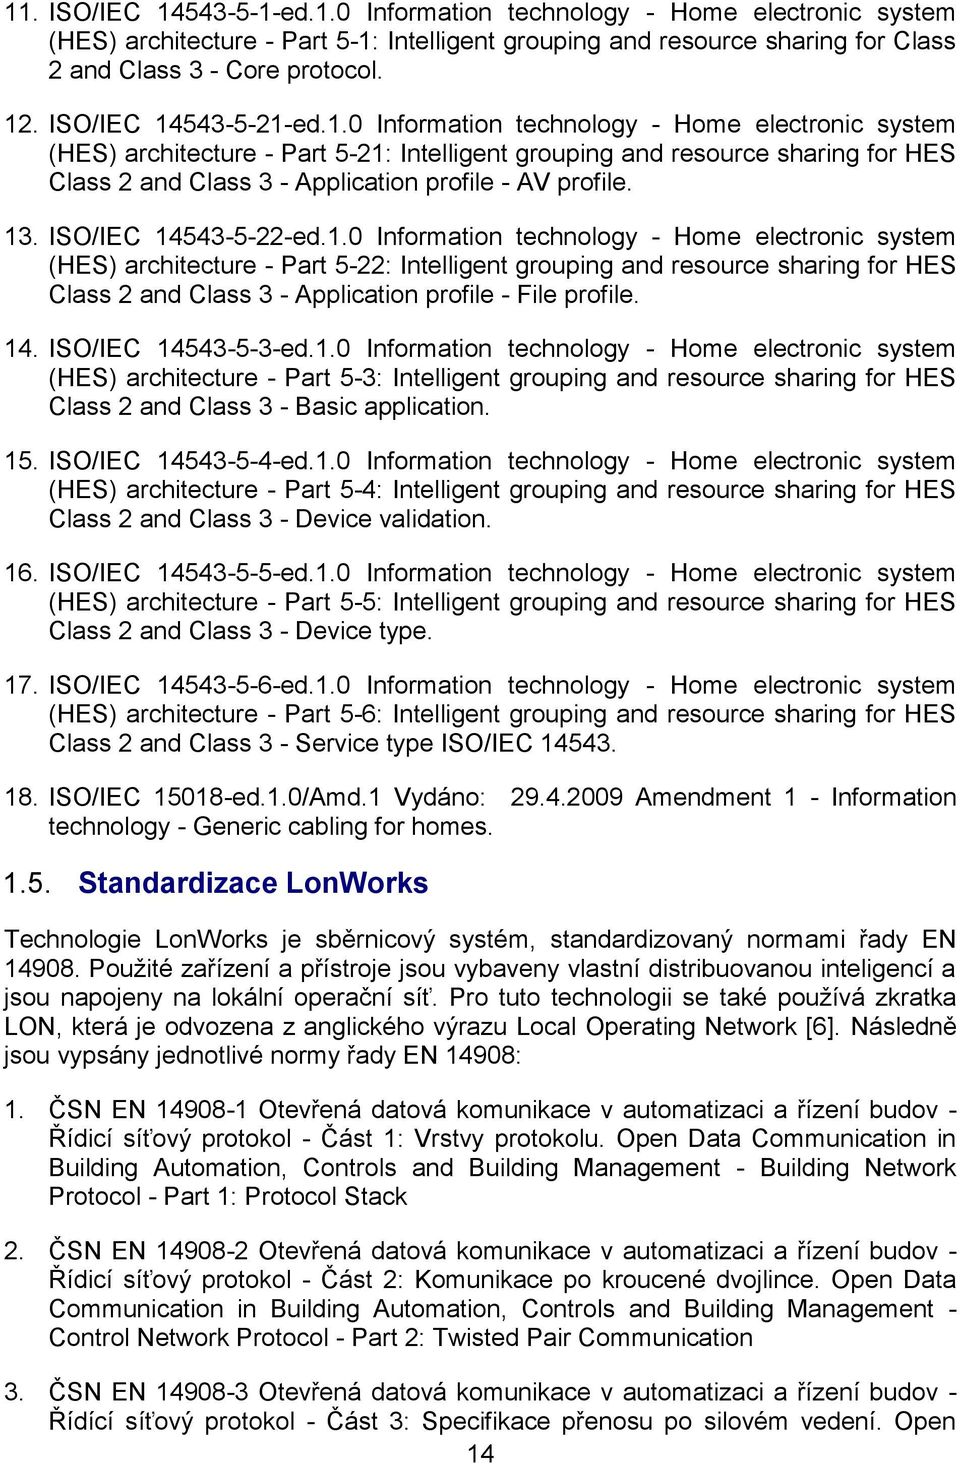 13. ISO/IEC 14543-5-22-ed.1.0 Information technology - Home electronic system (HES) architecture - Part 5-22: Intelligent grouping and resource sharing for HES Class 2 and Class 3 - Application profile - File profile.